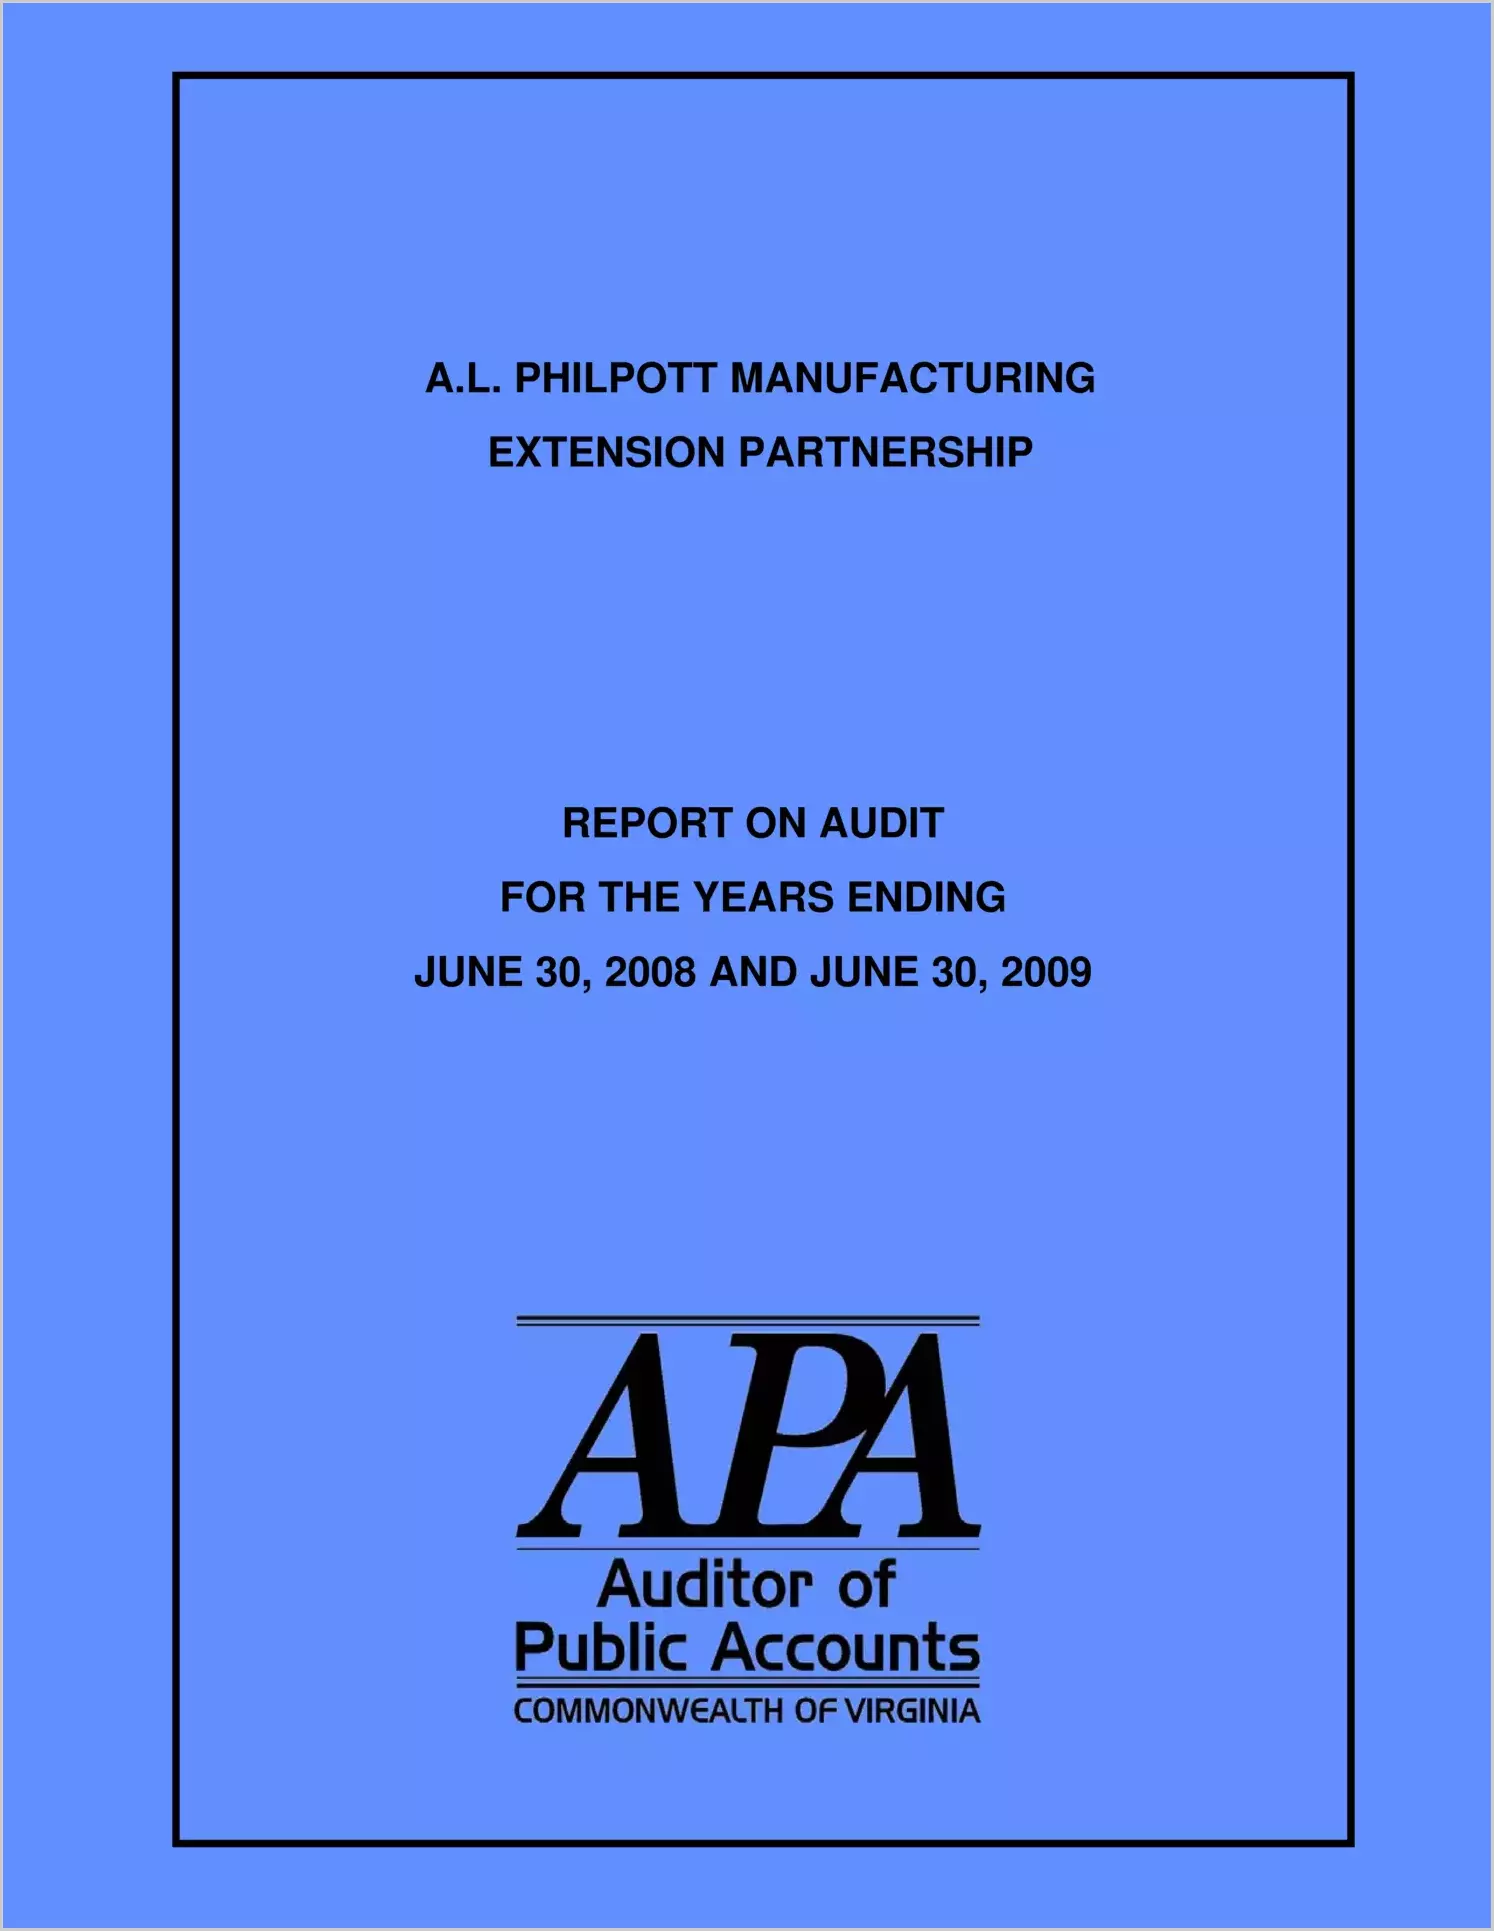 A.L. Philpott Manufacturing Extension Partnership report on Audit for the years ended June 30, 2008 and June 30, 2009